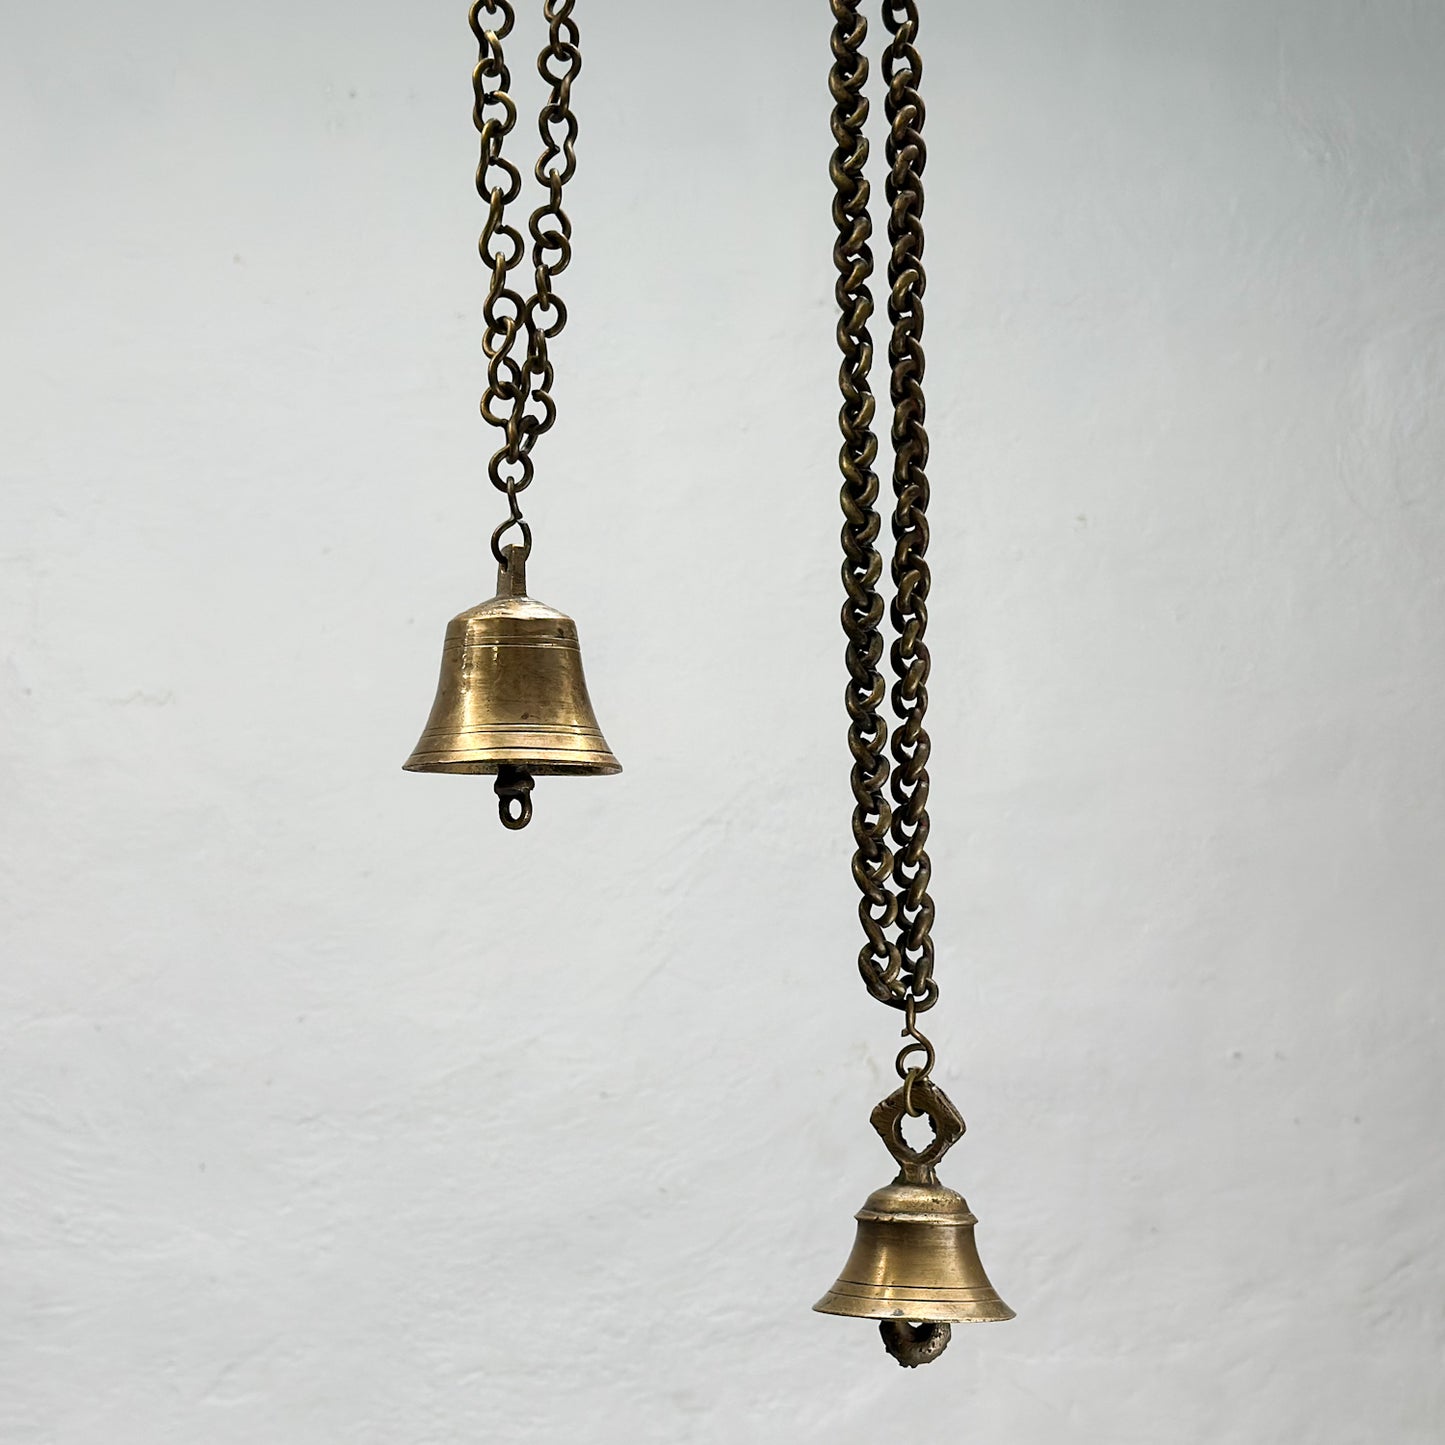 Assorted Vintage Brass Bell with Chain